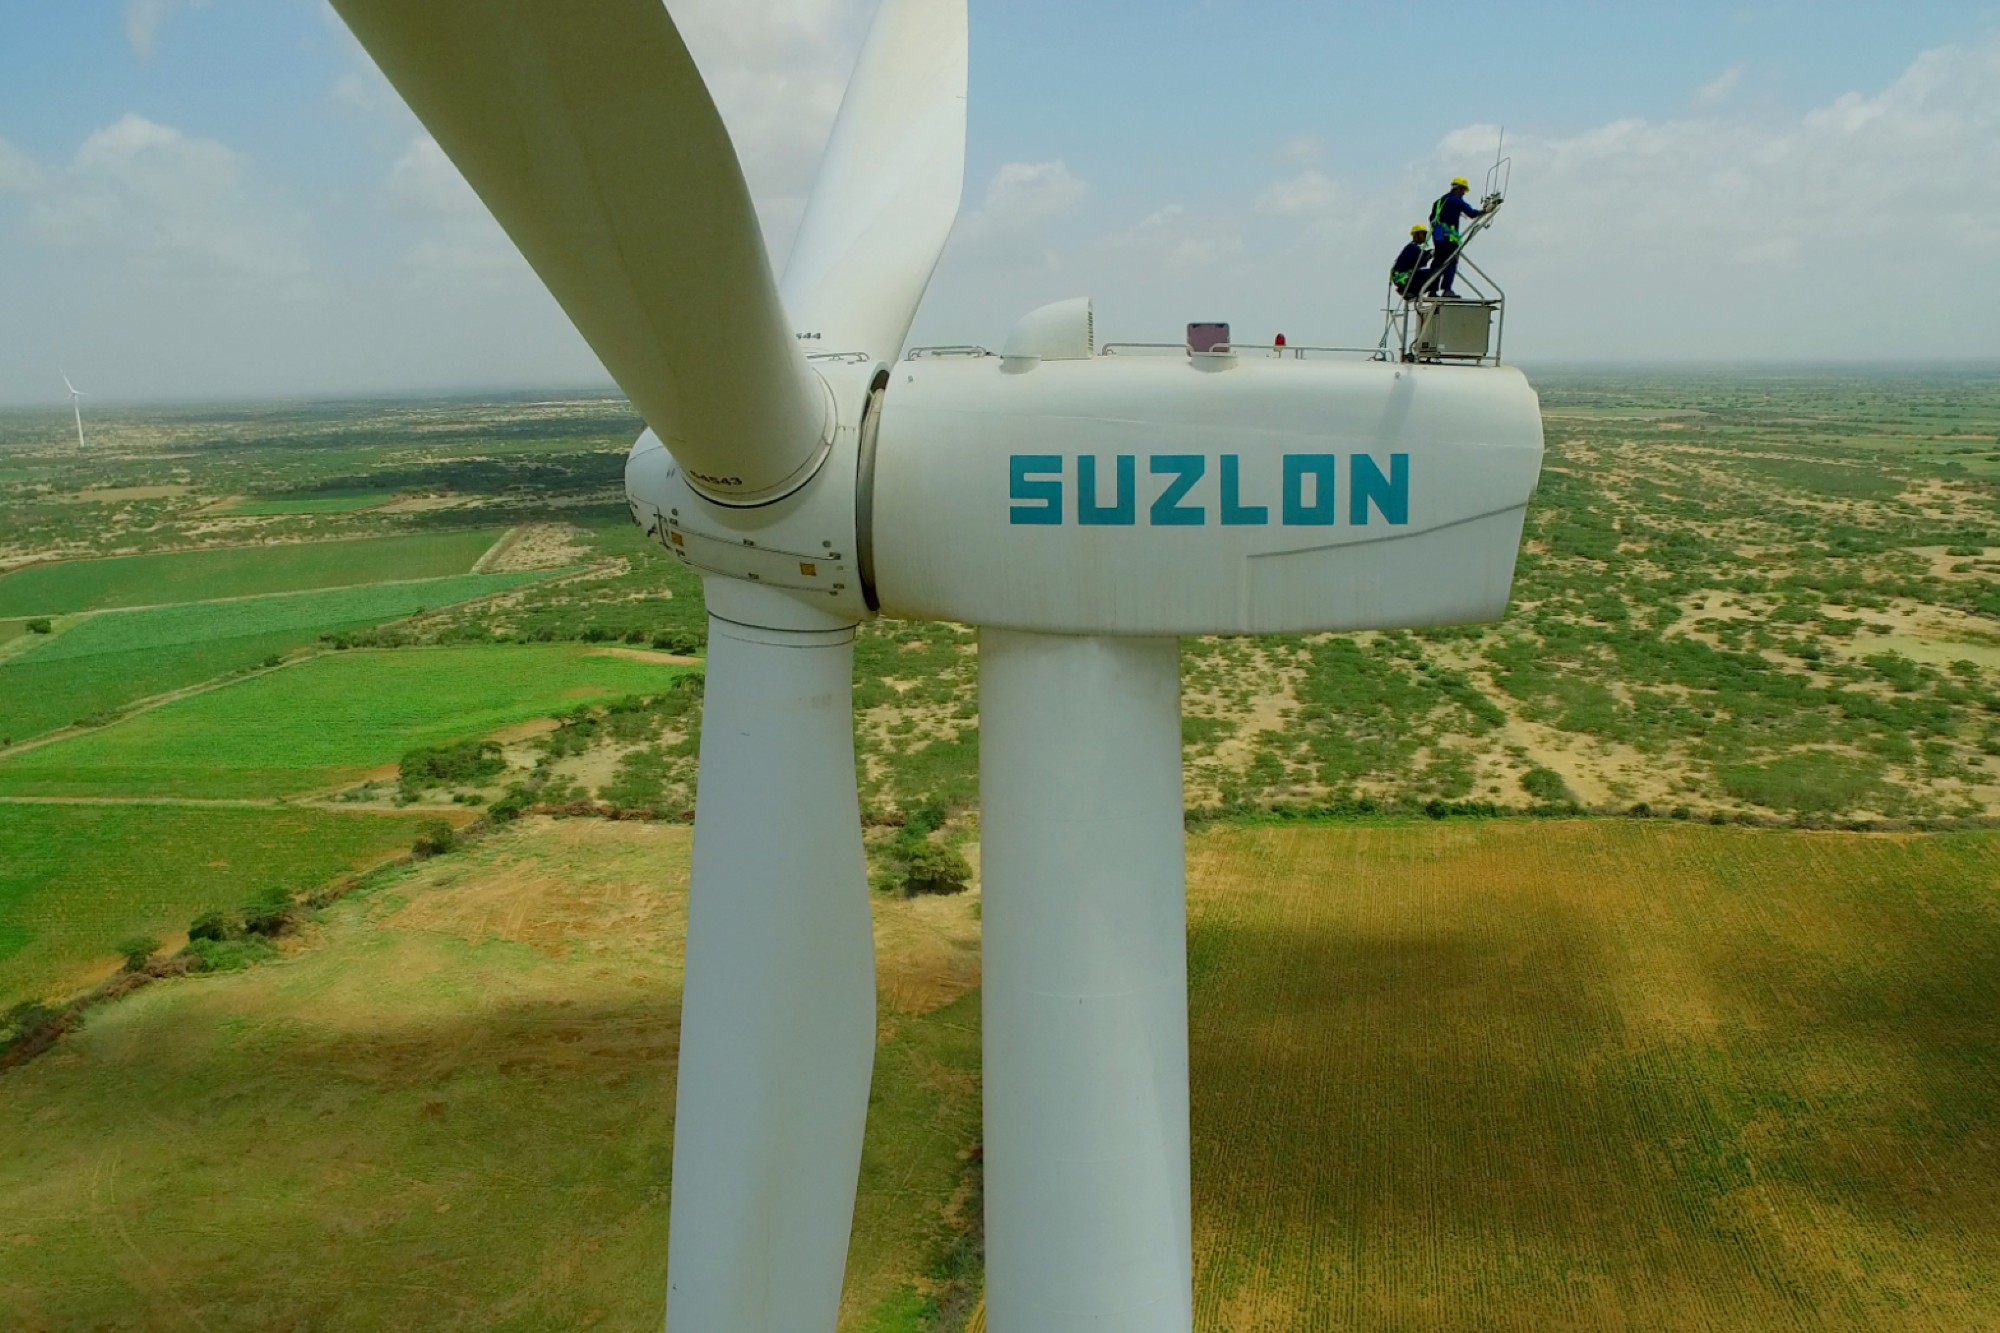 Suzlon clinches 402 mw orders from Juniper Green Energy